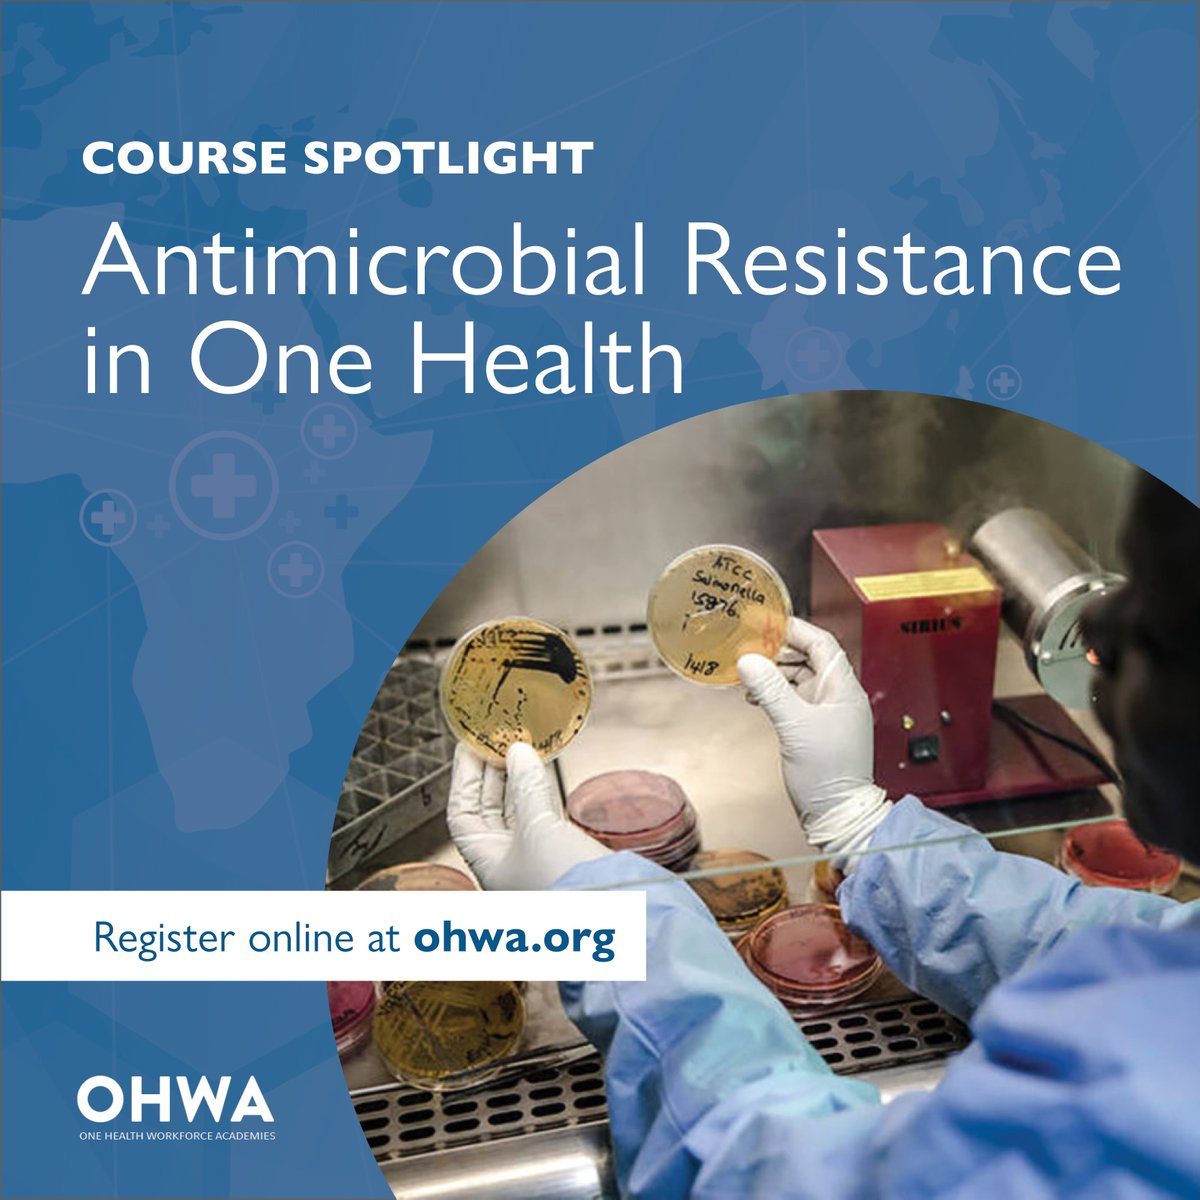 OHWA COURSE SPOTLIGHT: Antimicrobial Resistance in One Health (Introductory AND Advanced Level courses) The introductory course covers the principles, causes, and applications of #antimicrobialresistance (AMR) in #OneHealth sectors. The advanced level course provides…